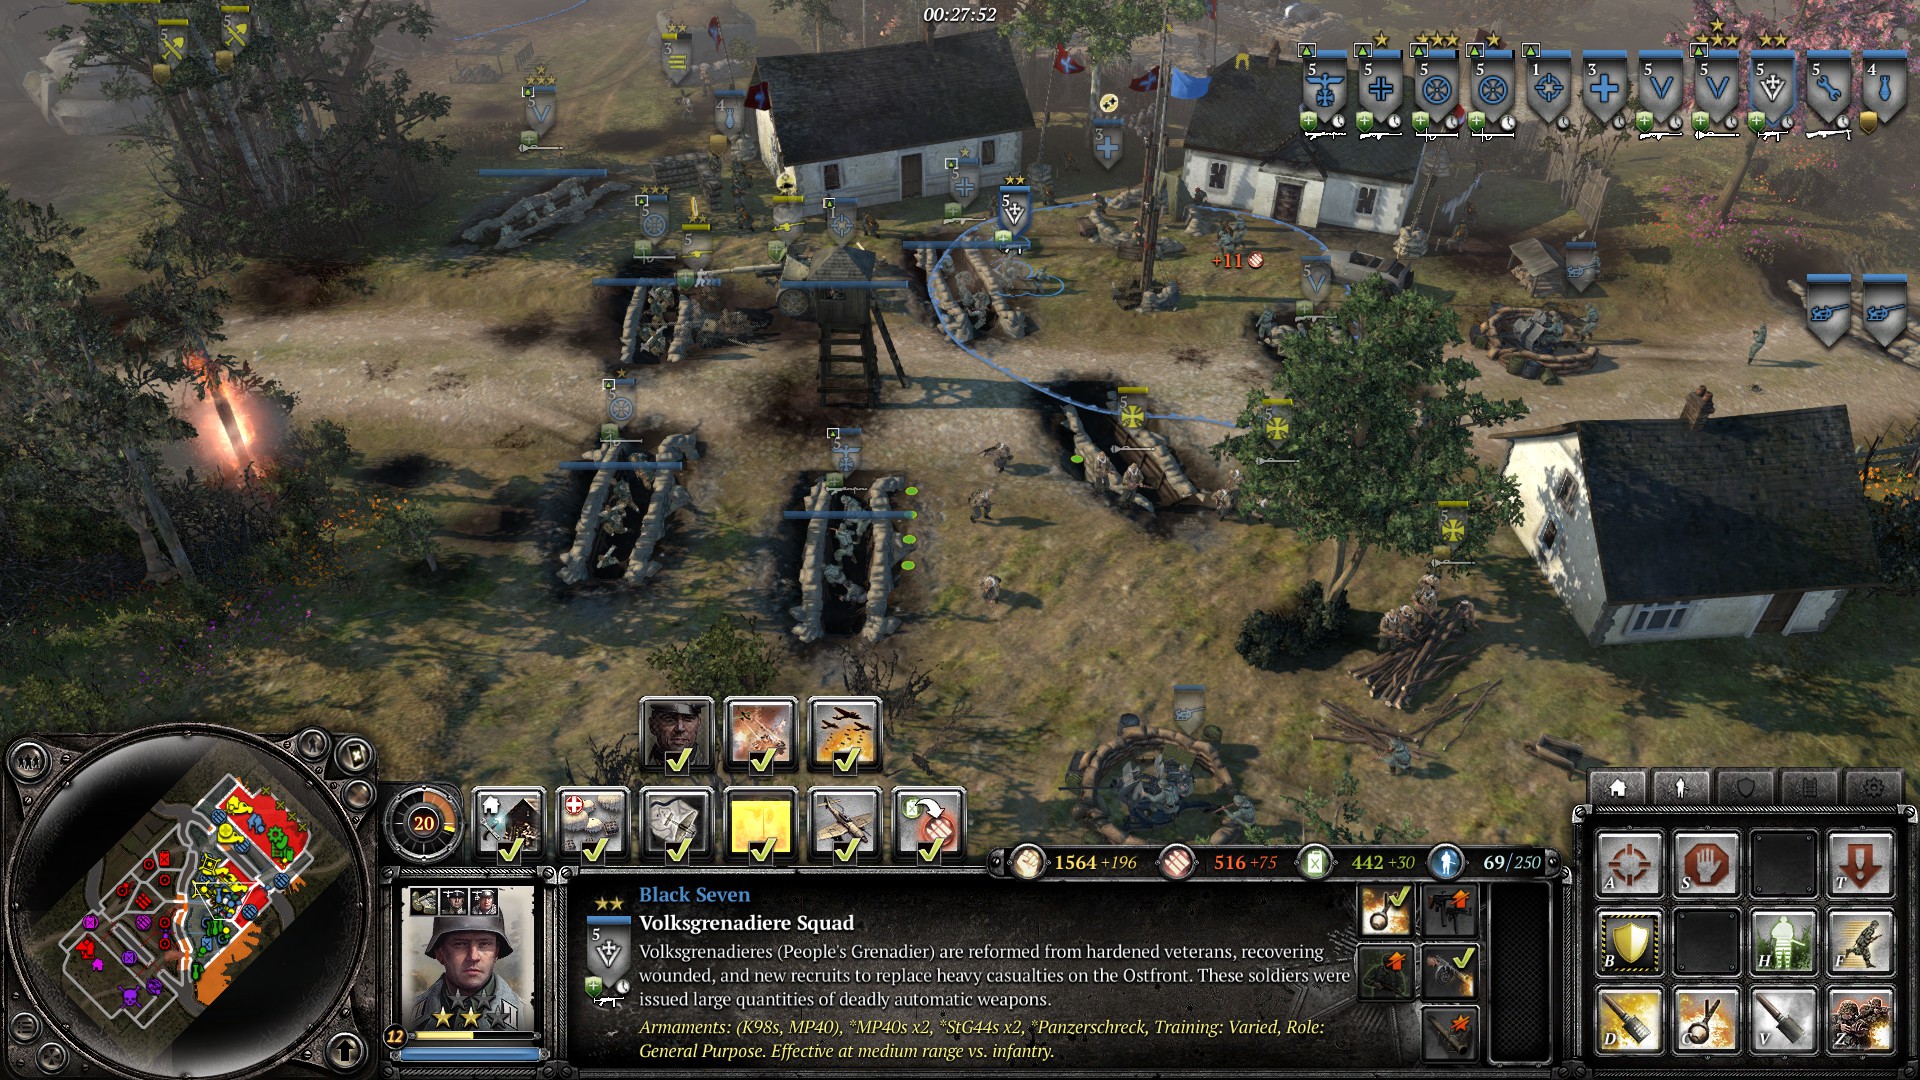 company of heroes new steam version mods